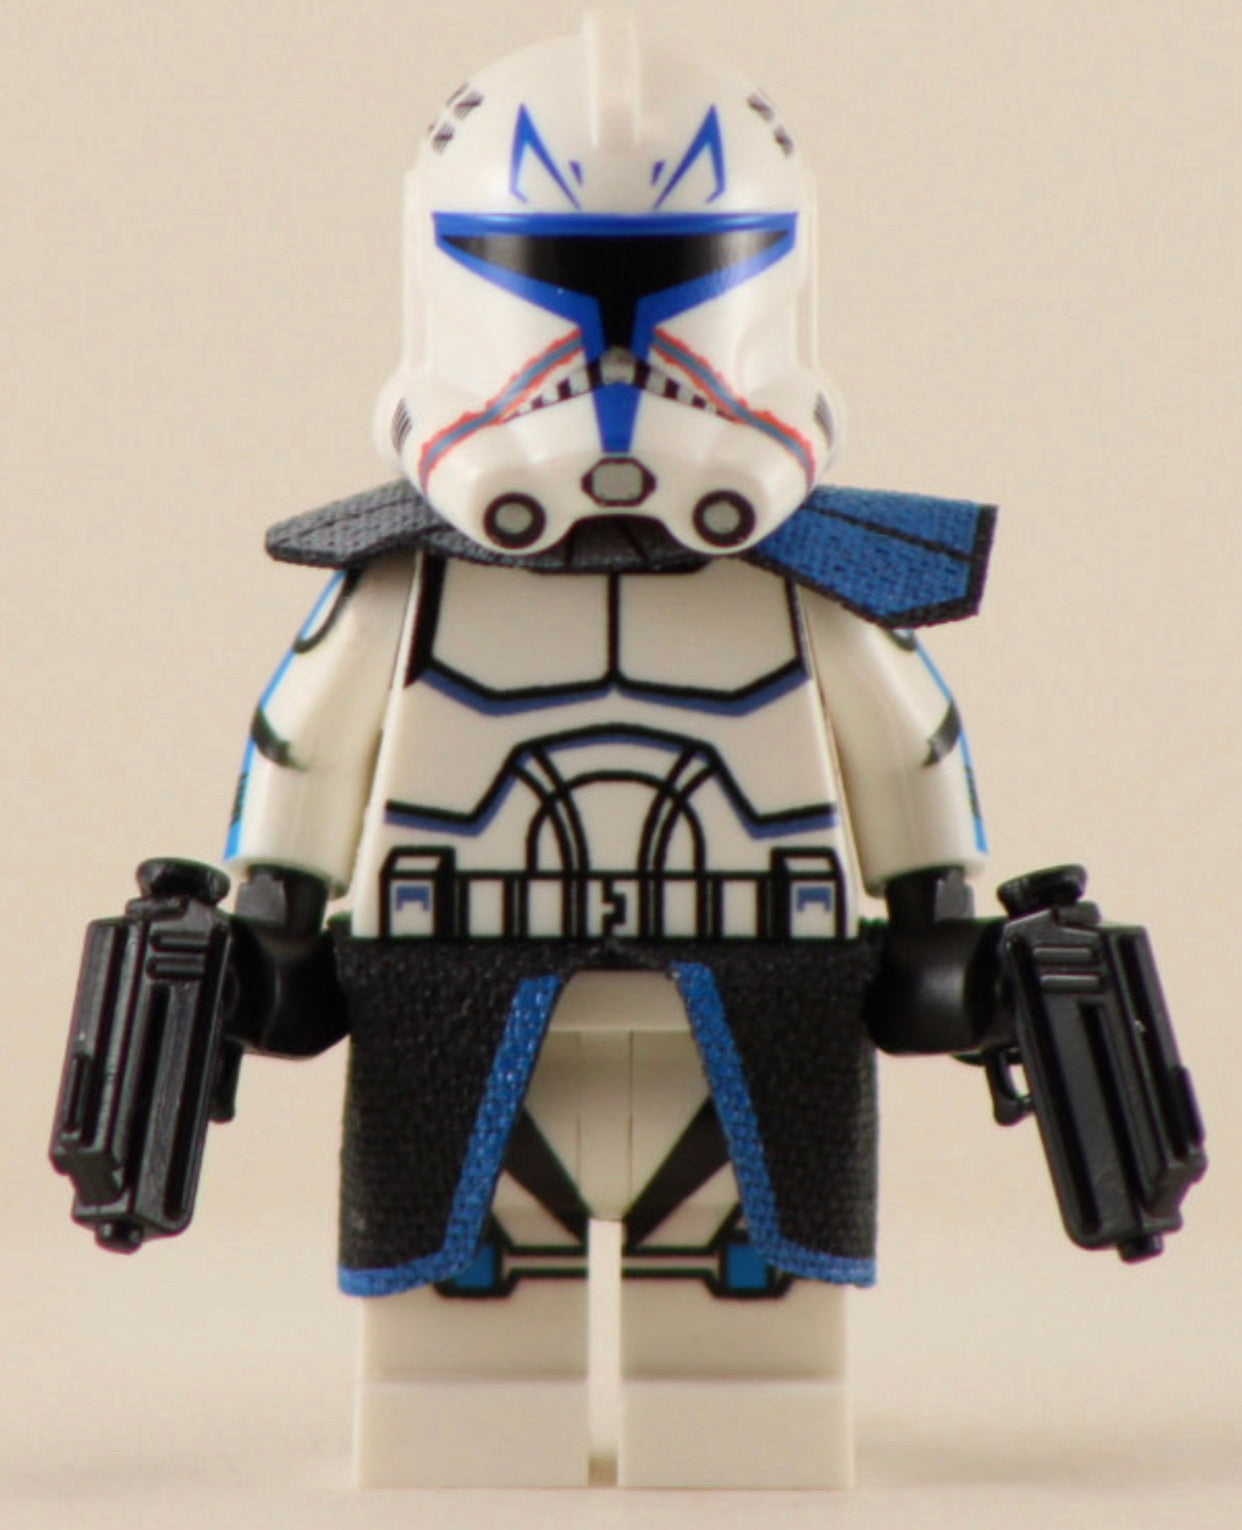 LEGO Star Wars UCS P2 Captain Rex UNRELEASED EXCLUSIVE MINIFIGURE *ships  fast*